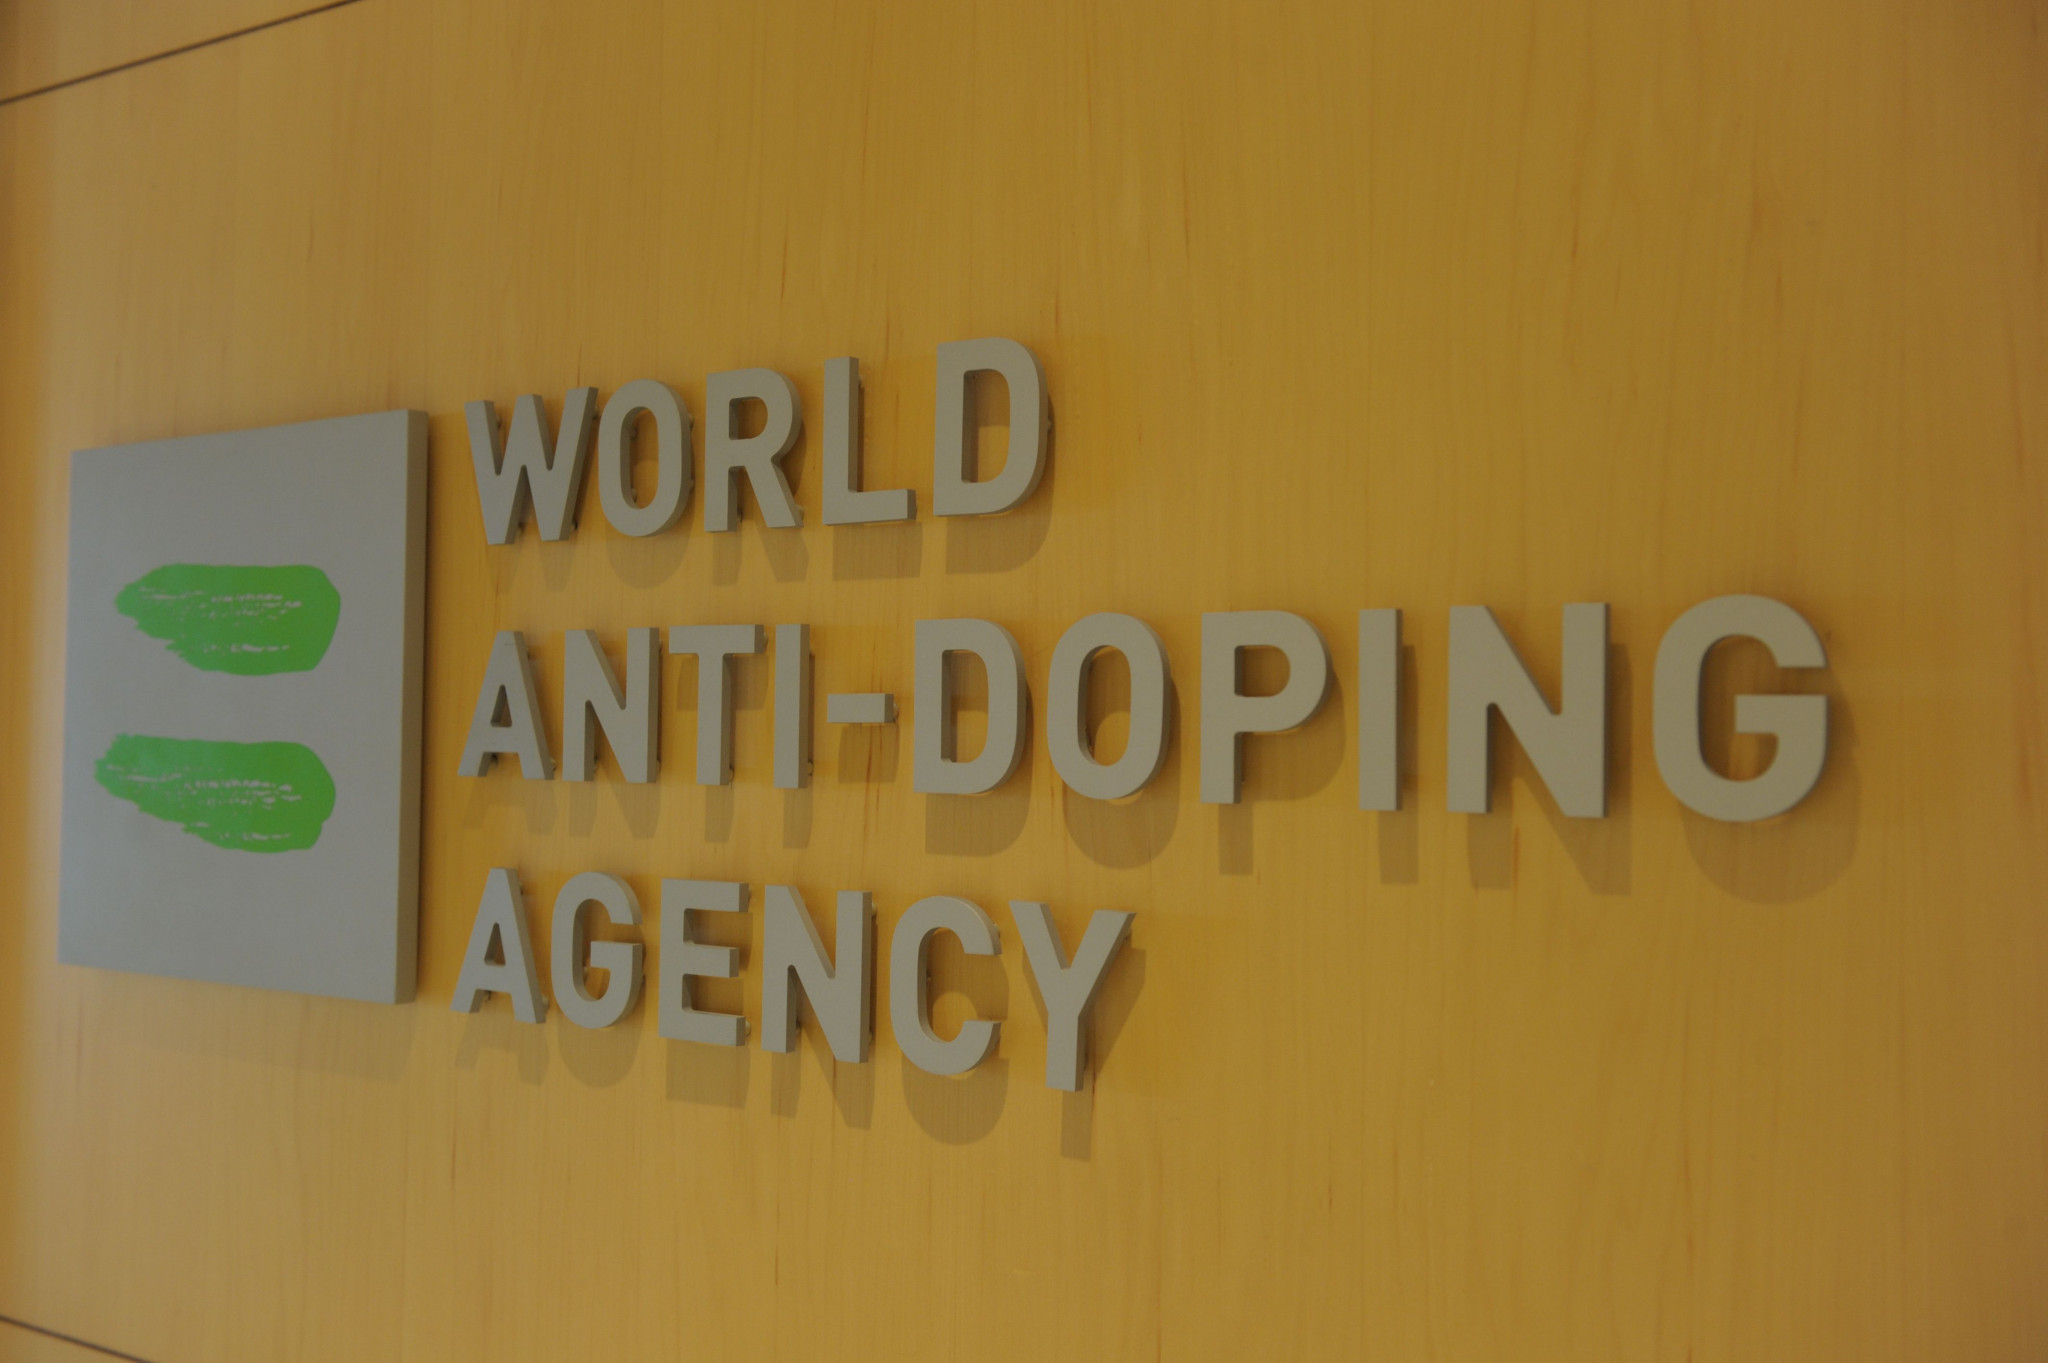 A governance review of the World Anti-Doping Agency by the Institute of National Anti-Doping Organisations led to the three reforms being put forward ©Getty Images